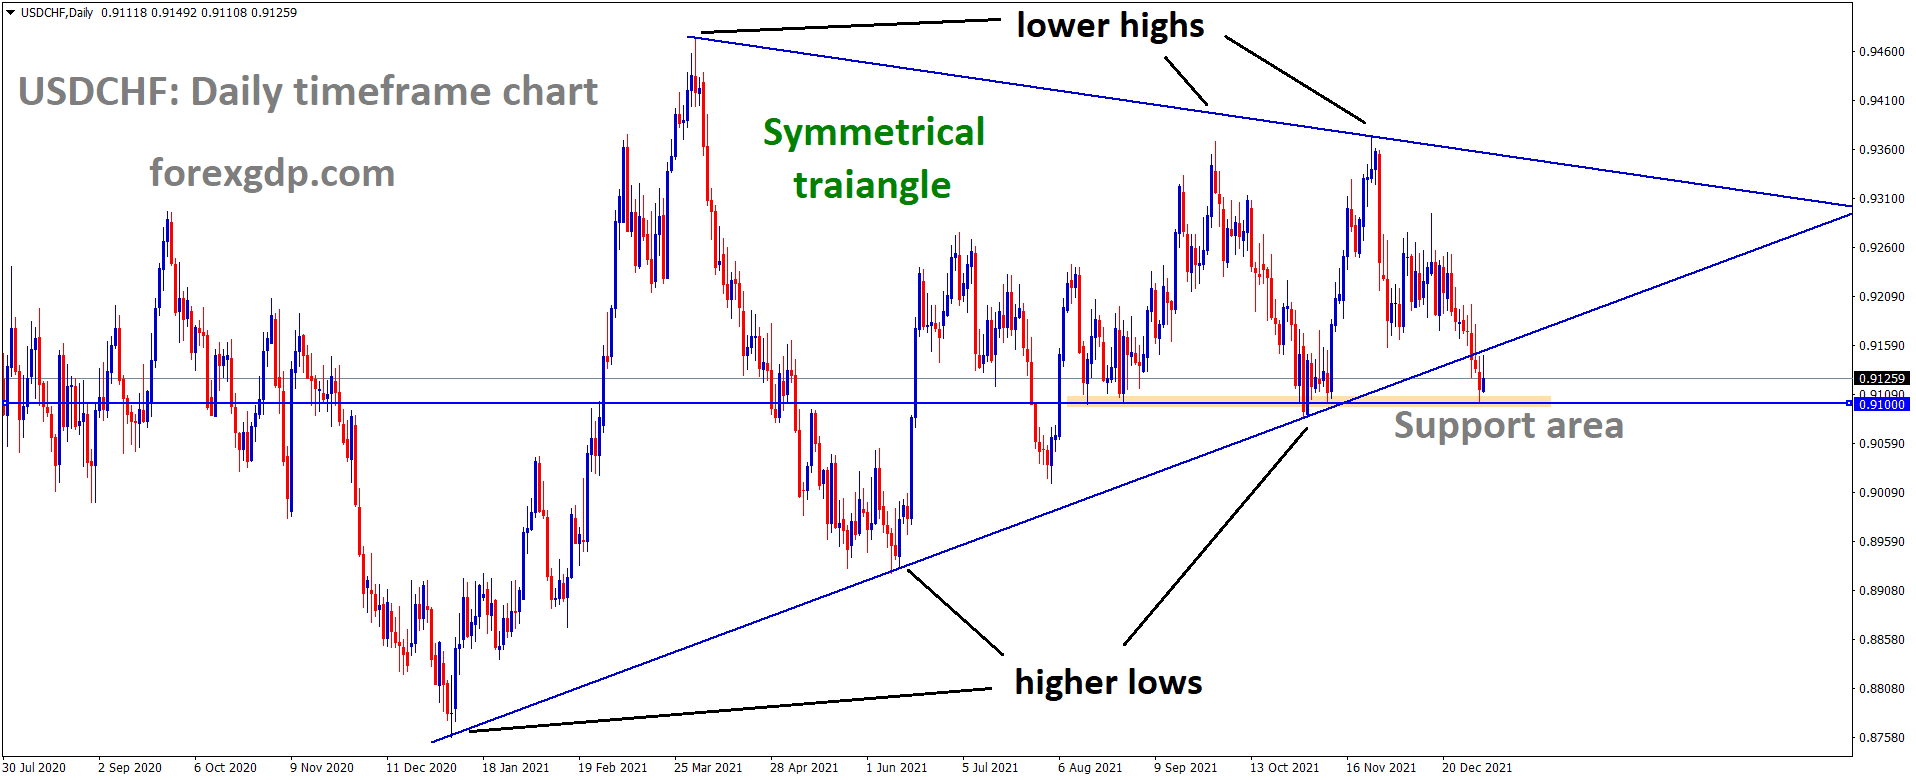 USDCHF is moving in the symmetrical triangle pattern and the market has reached the support area of the triangle pattern